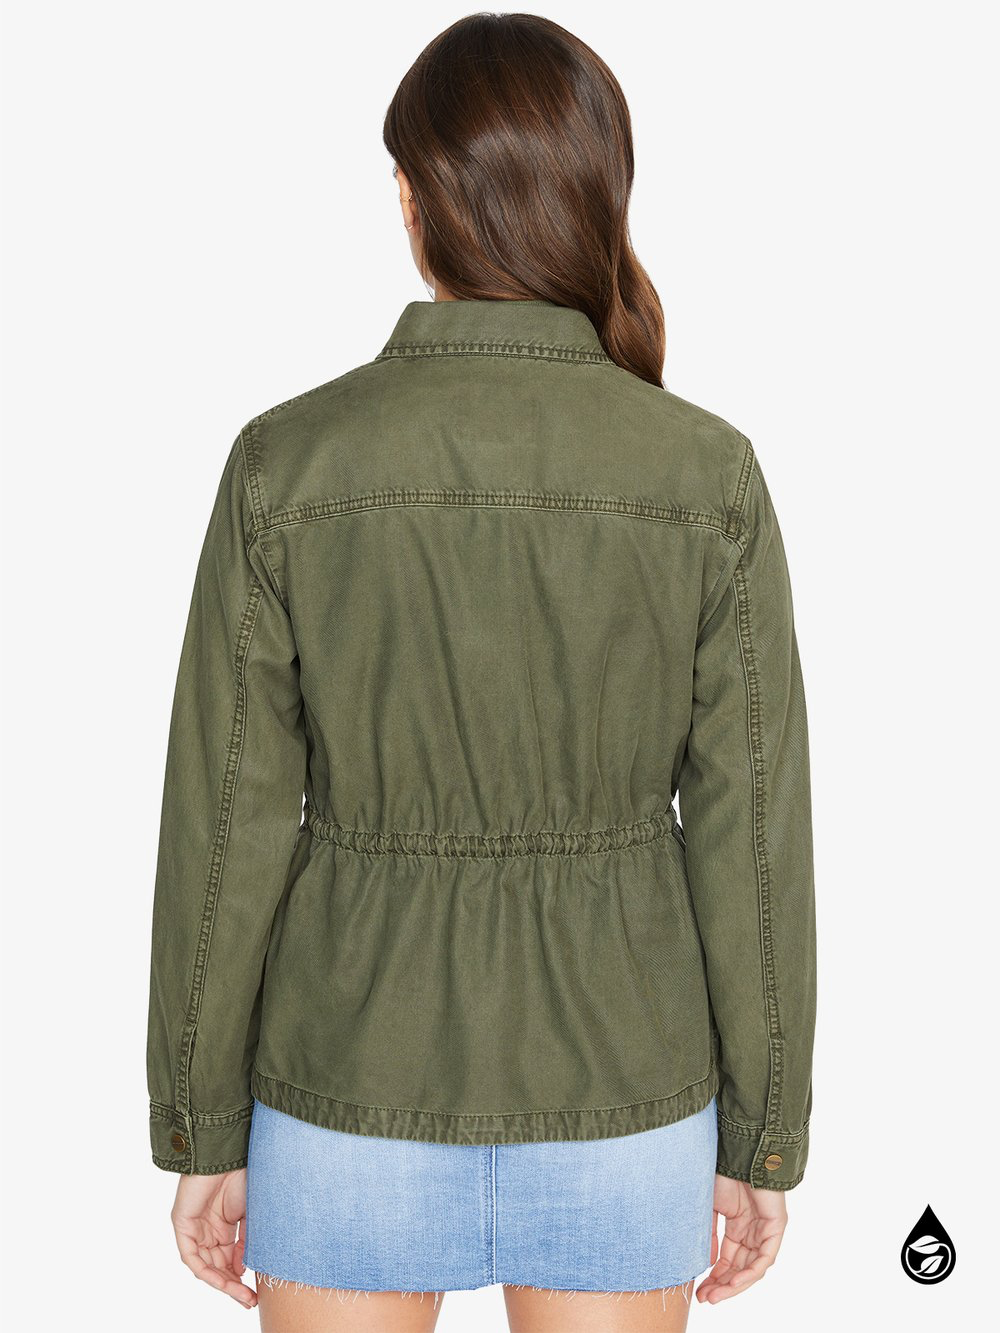 Liberty Military Jacket Army Green - Kingfisher Road - Online Boutique